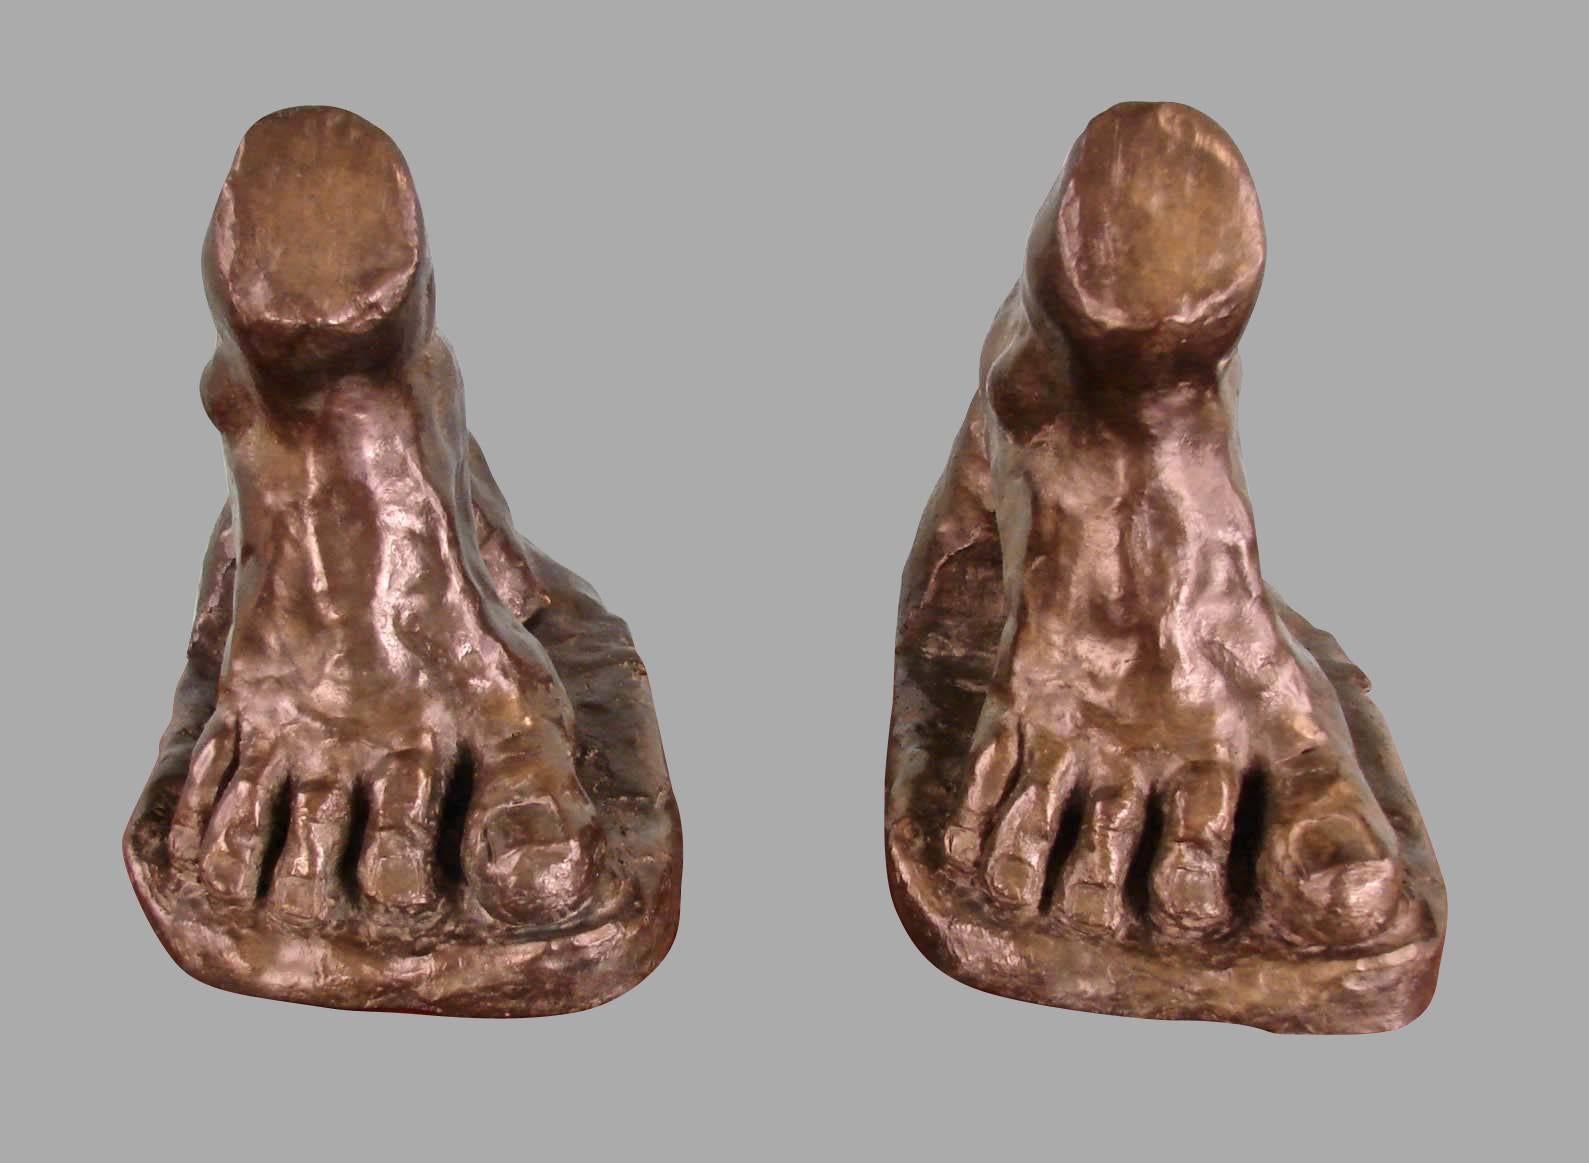 A single casting of well-modeled bronzes with brown patina in the form of feet, made and signed by Susan Dendy, numbered 1/2 and 2/2 respectively and dated 1999. From the estate of a prominent southern California philanthropist.